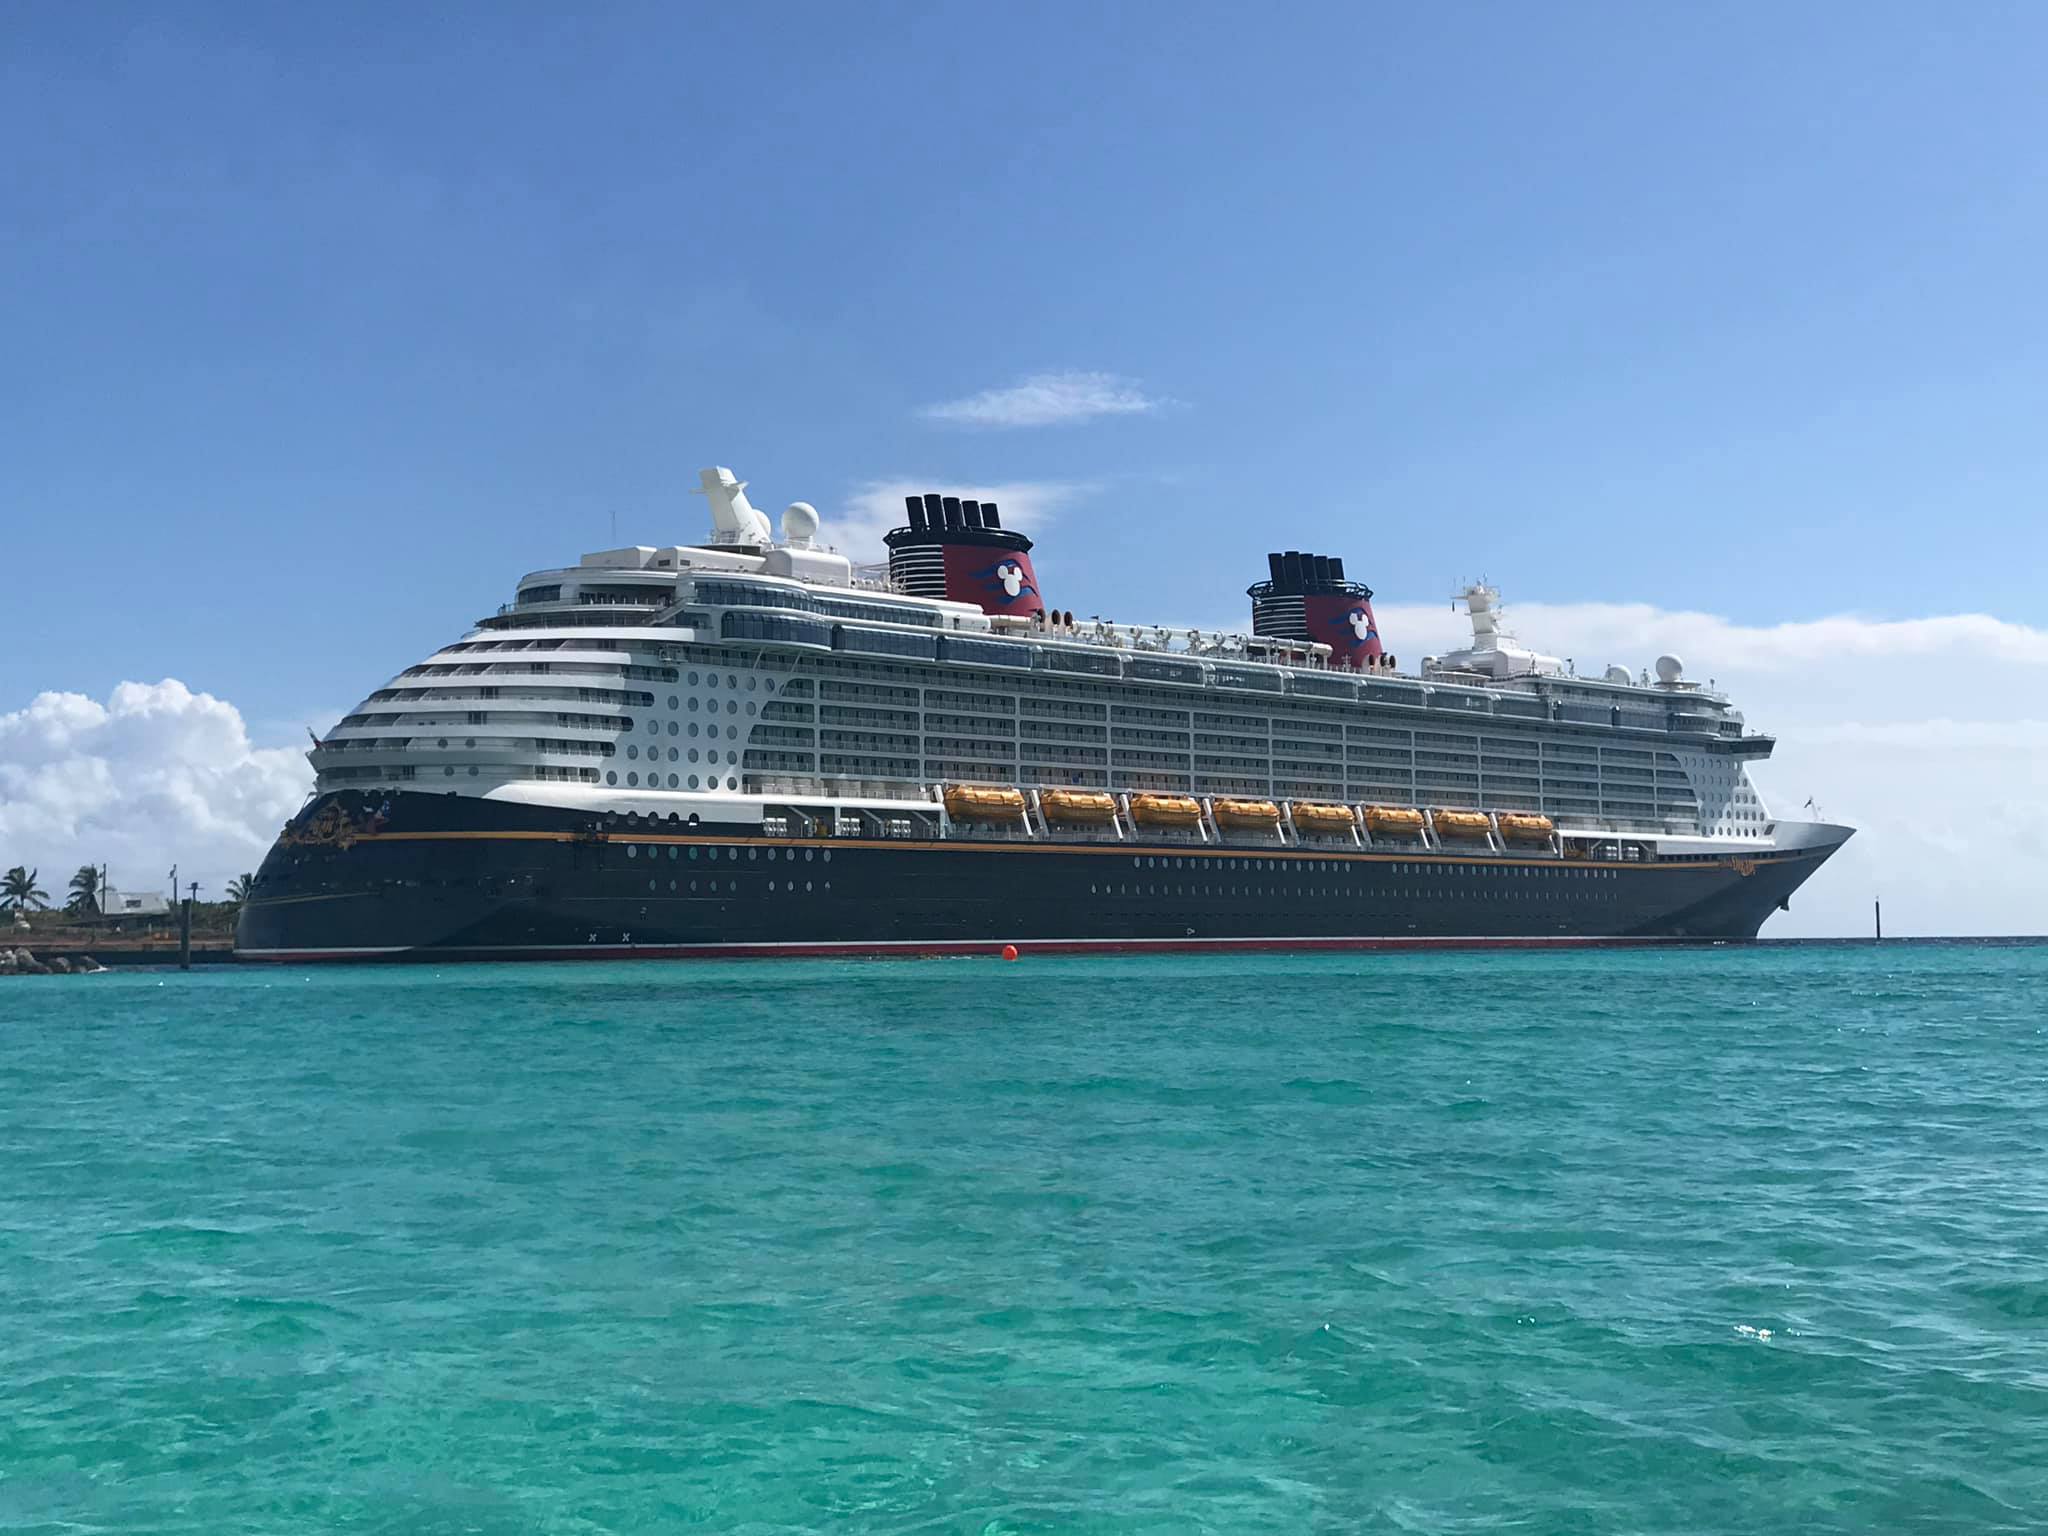 Disney Cruise Line to Increase Screening for Guests and Crew Due to Coronavirus